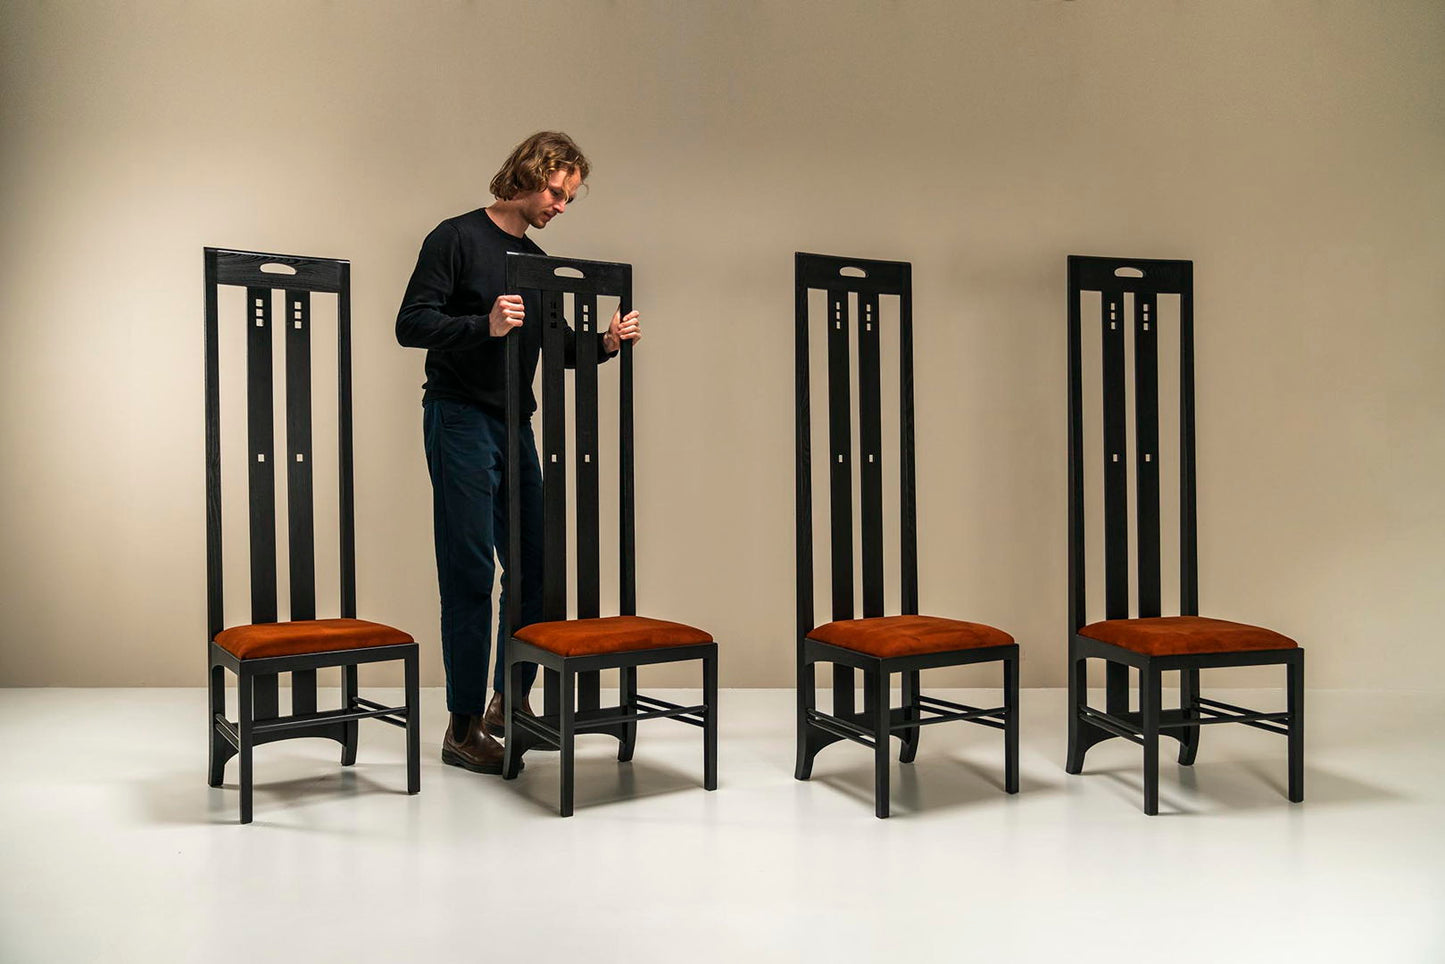 Set of 4 highback "Ingram" Dining Chairs in Ash and Fabric by Charles Rennie Mackintosh, Italy 1980s